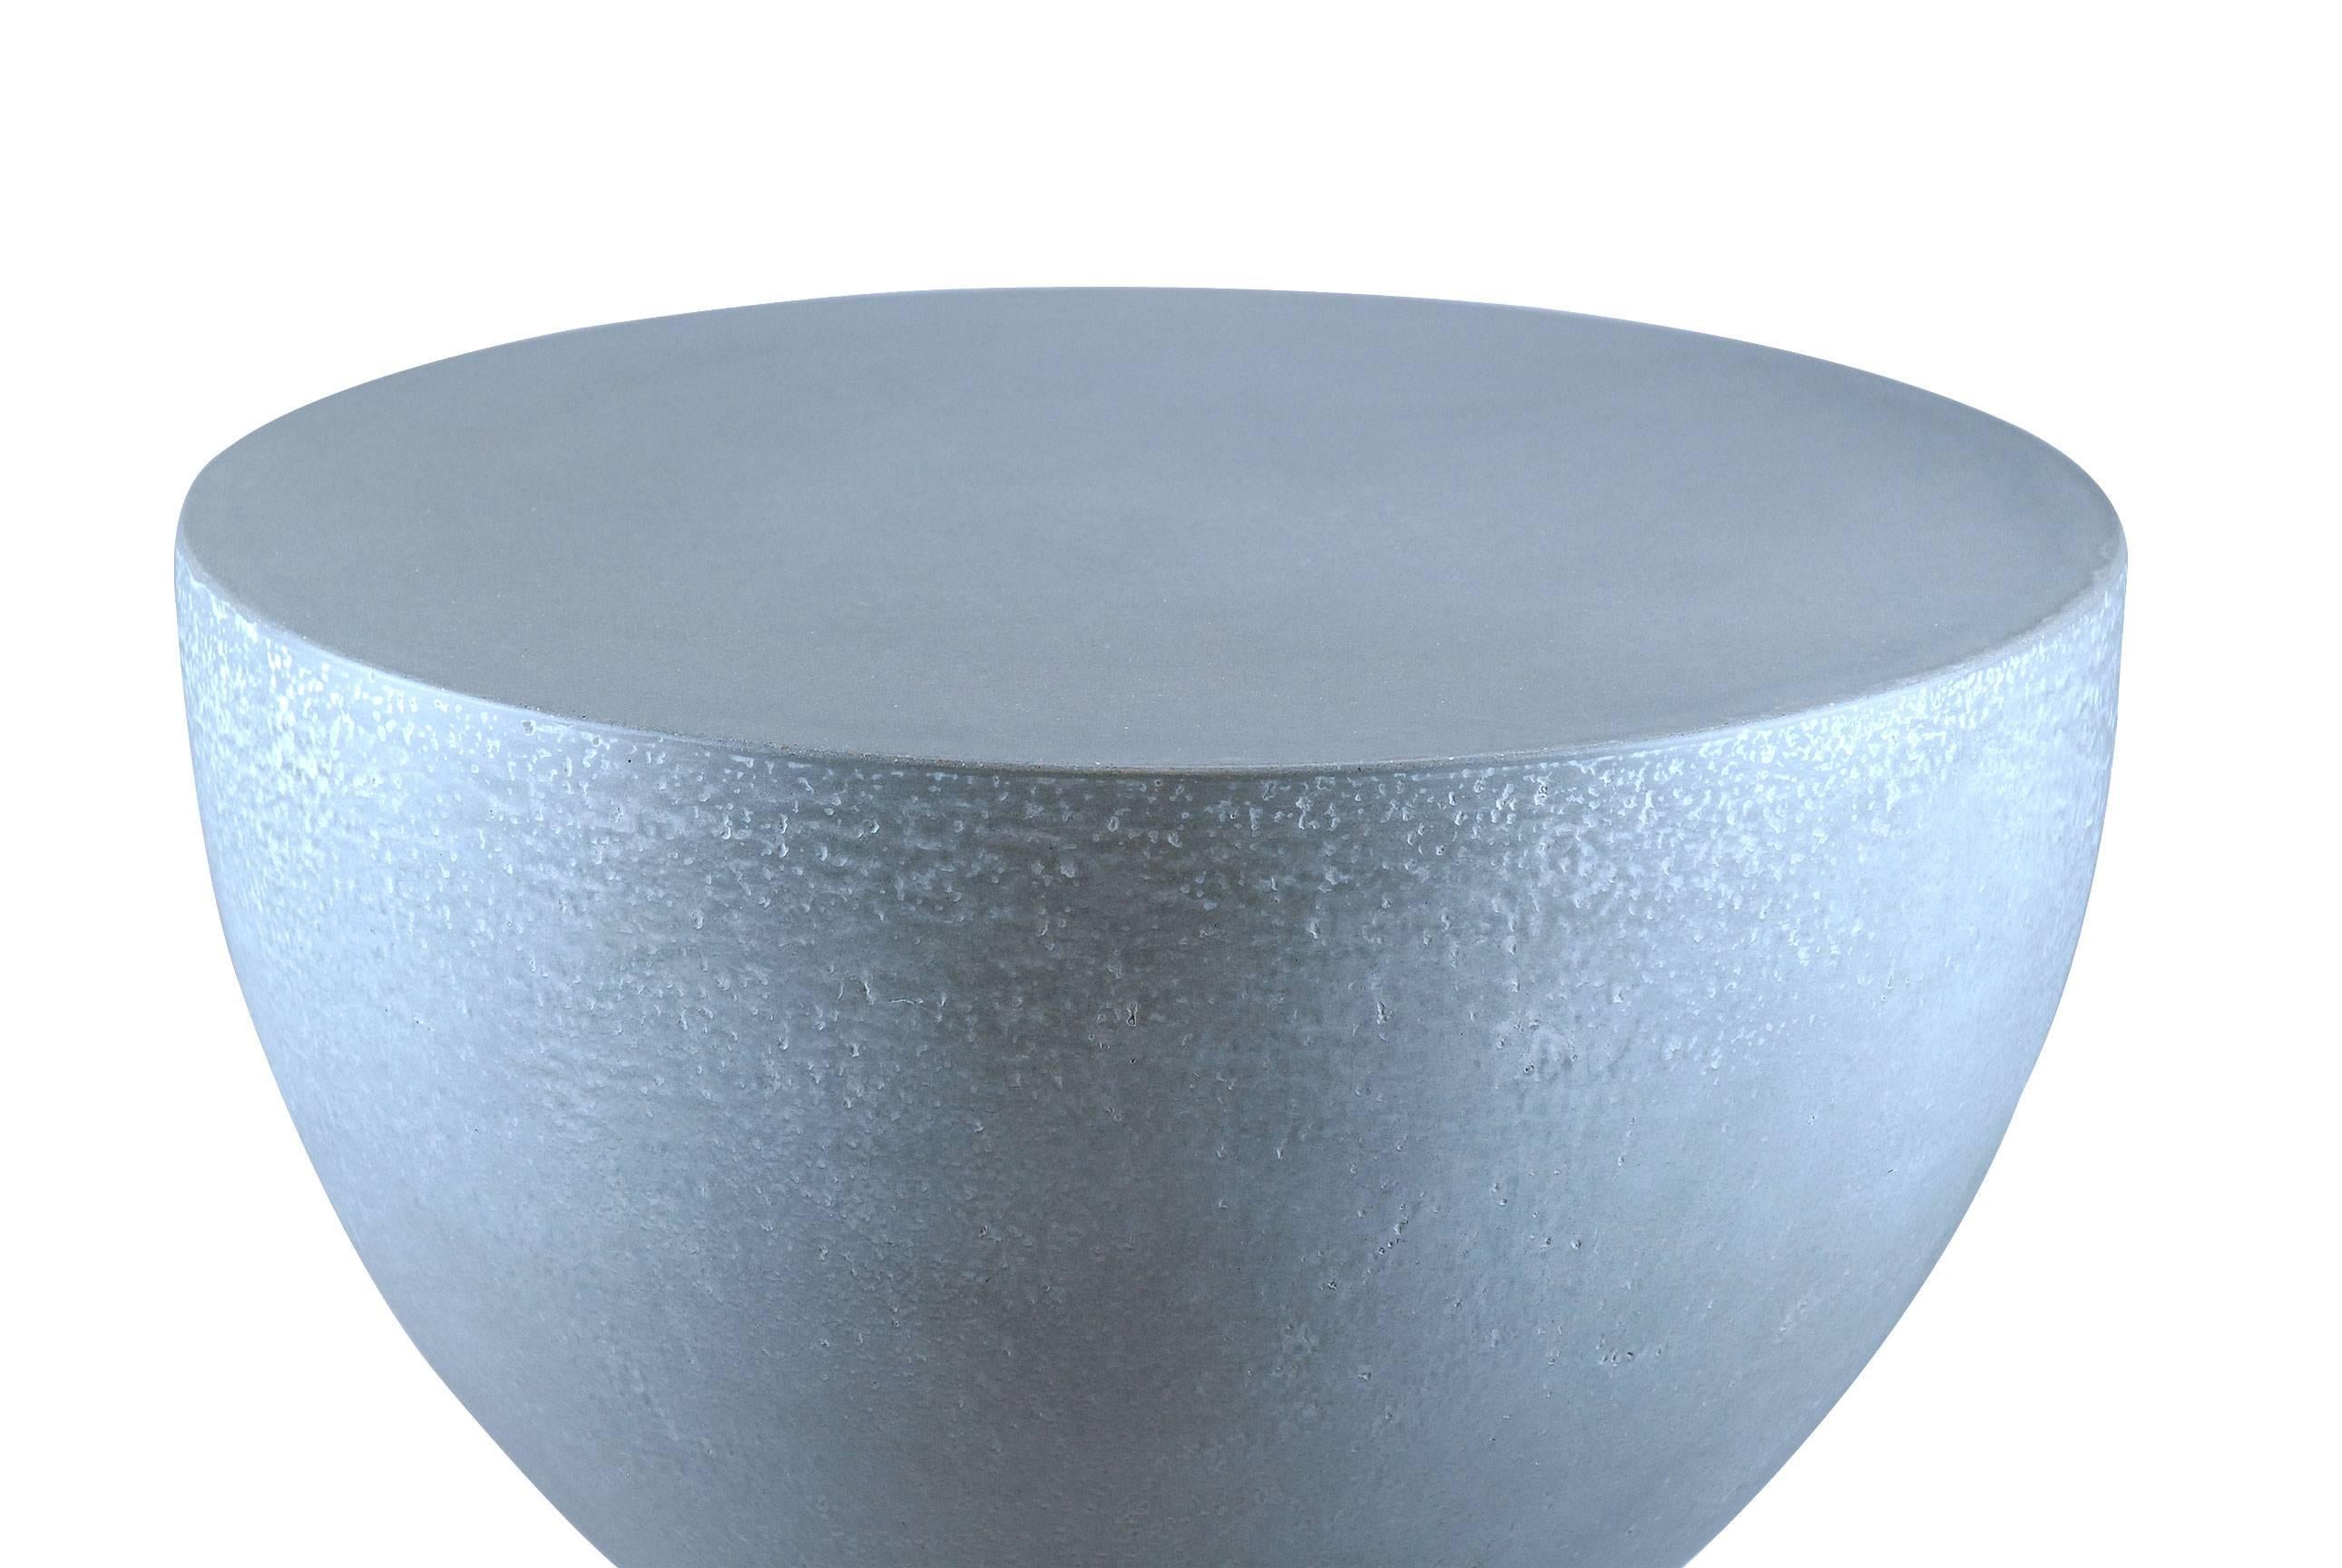 This highly refined hourglass concrete accent table is perfect for a foyer. It's smooth lines are welcoming and color options can be selected by the client. A custom top can also be added if additional surface space is needed. In addition to the